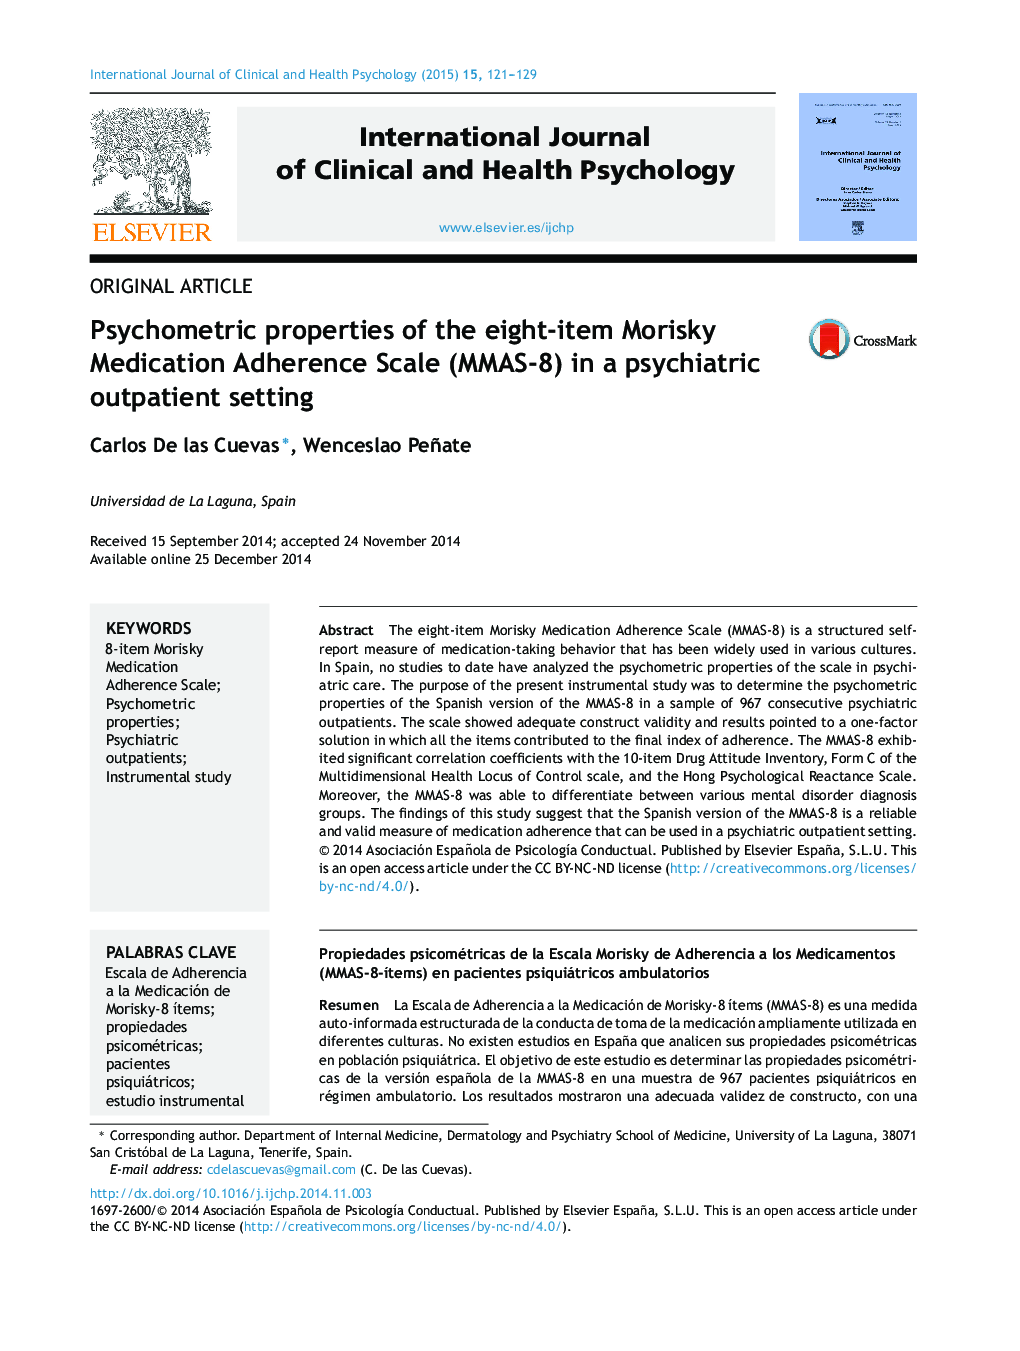 Psychometric properties of the eight-item Morisky Medication Adherence Scale (MMAS-8) in a psychiatric outpatient setting 